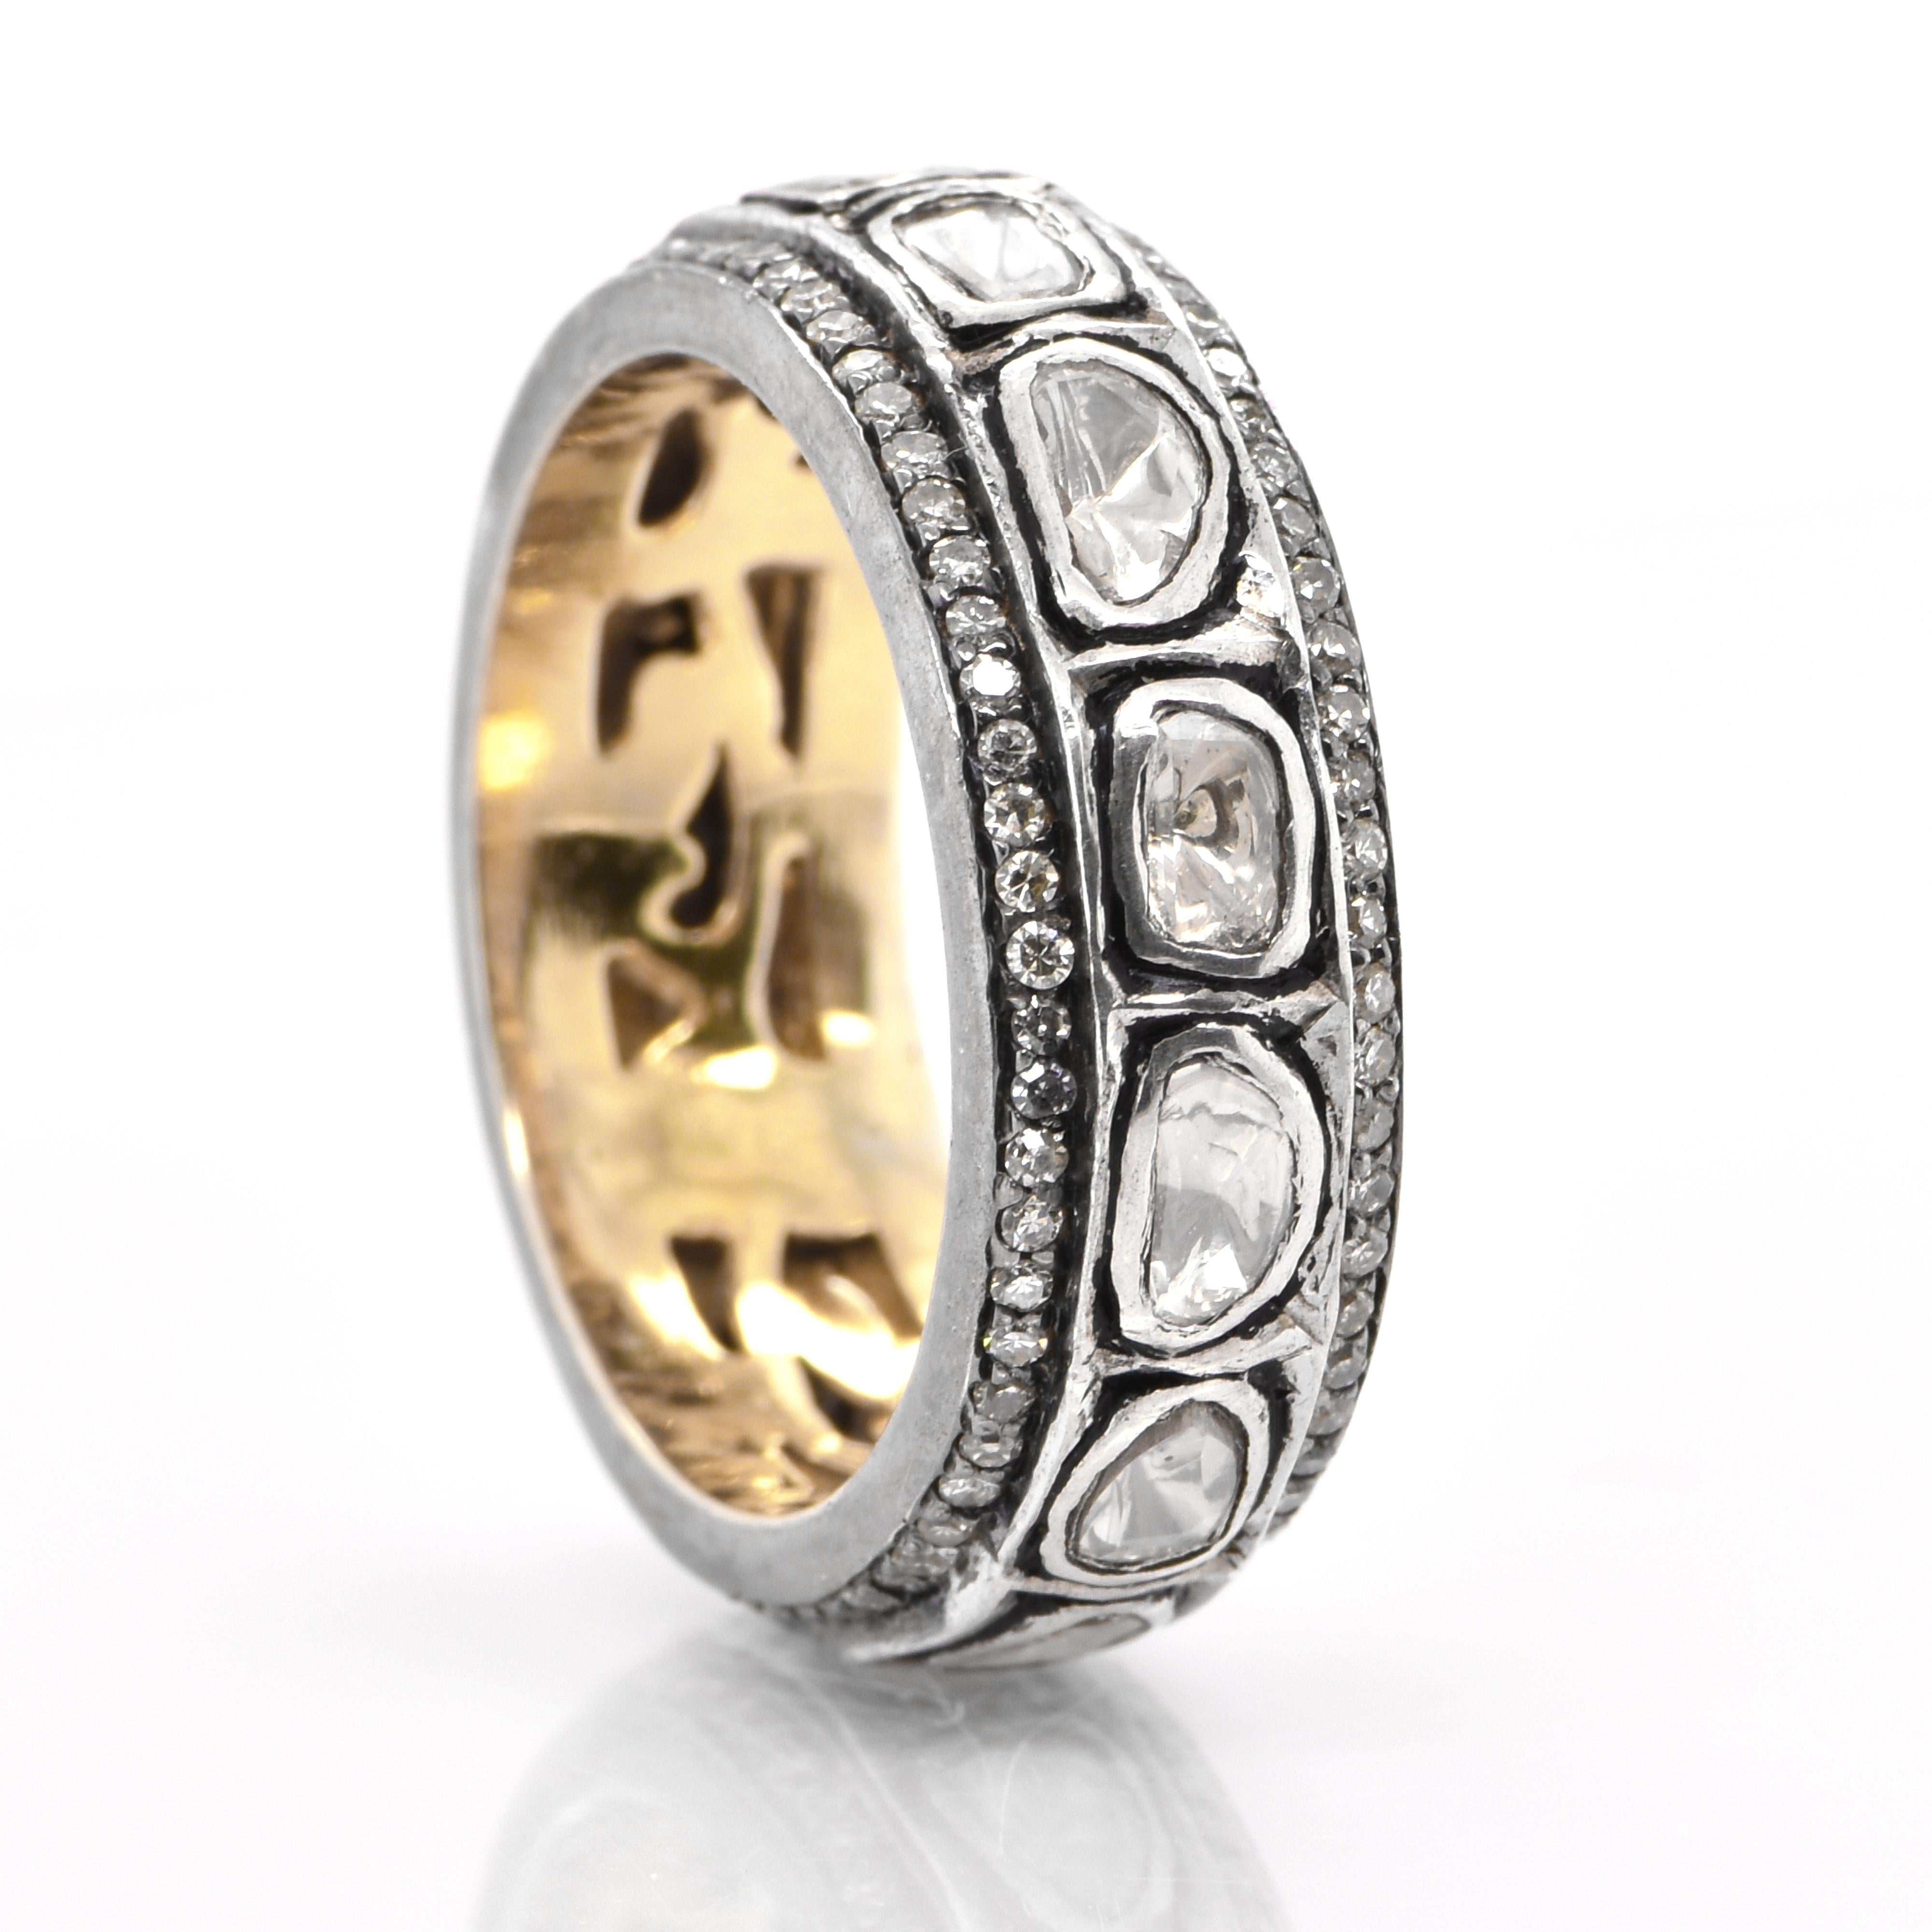 A stunning Victorian Style Full Eternity ring featuring a total of 0.65 Carats of Polki Diamonds as well as 0.45 Carats of Accent Diamonds set in Silver and Gold. Diamonds have been adorned and cherished throughout human history and date back to